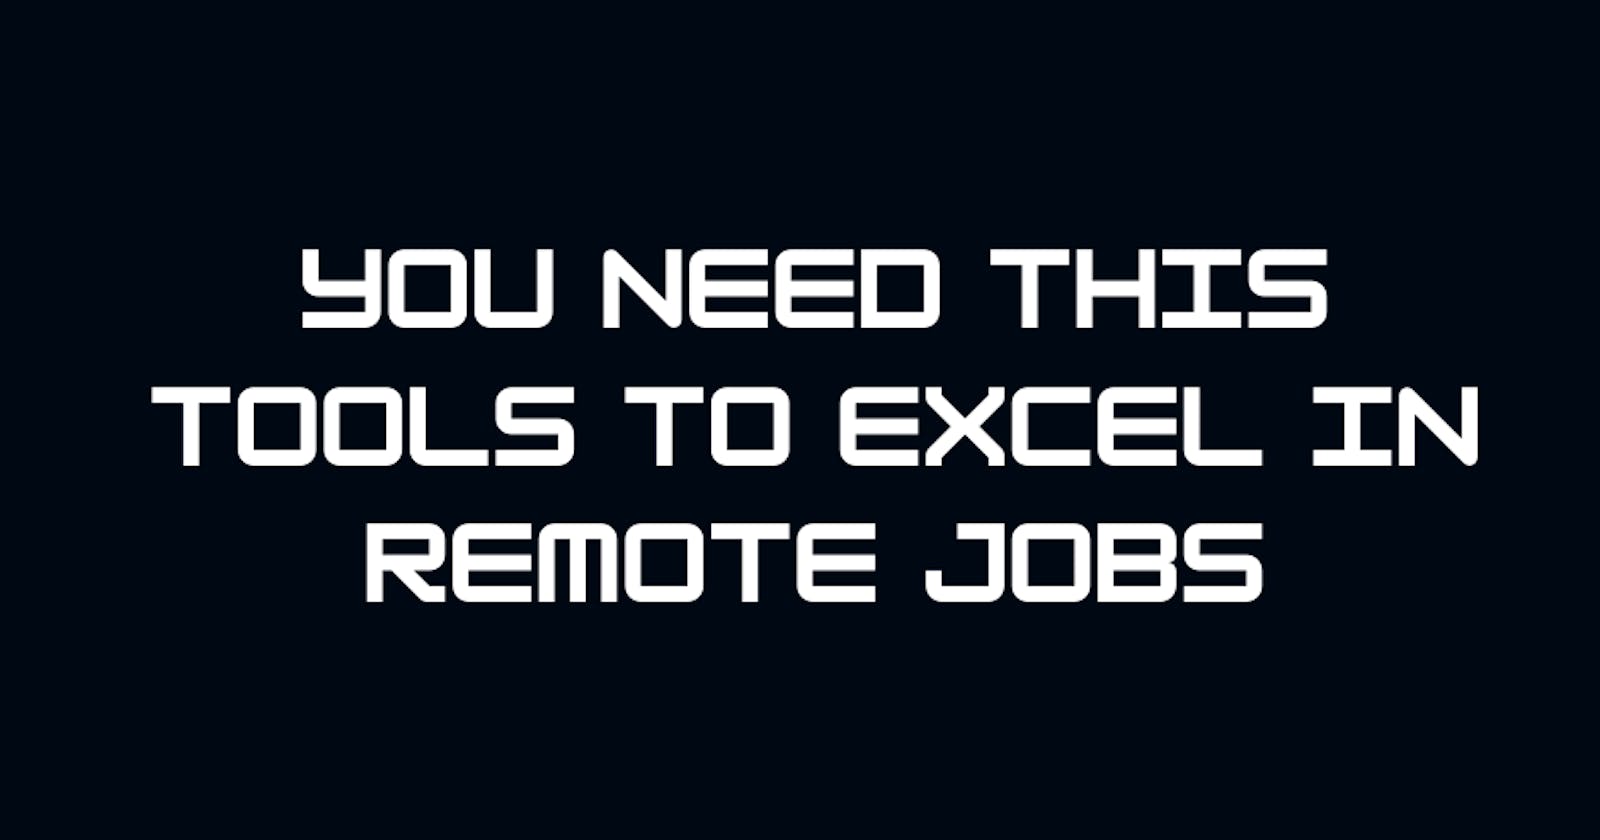 You need these tools to excel in remote jobs